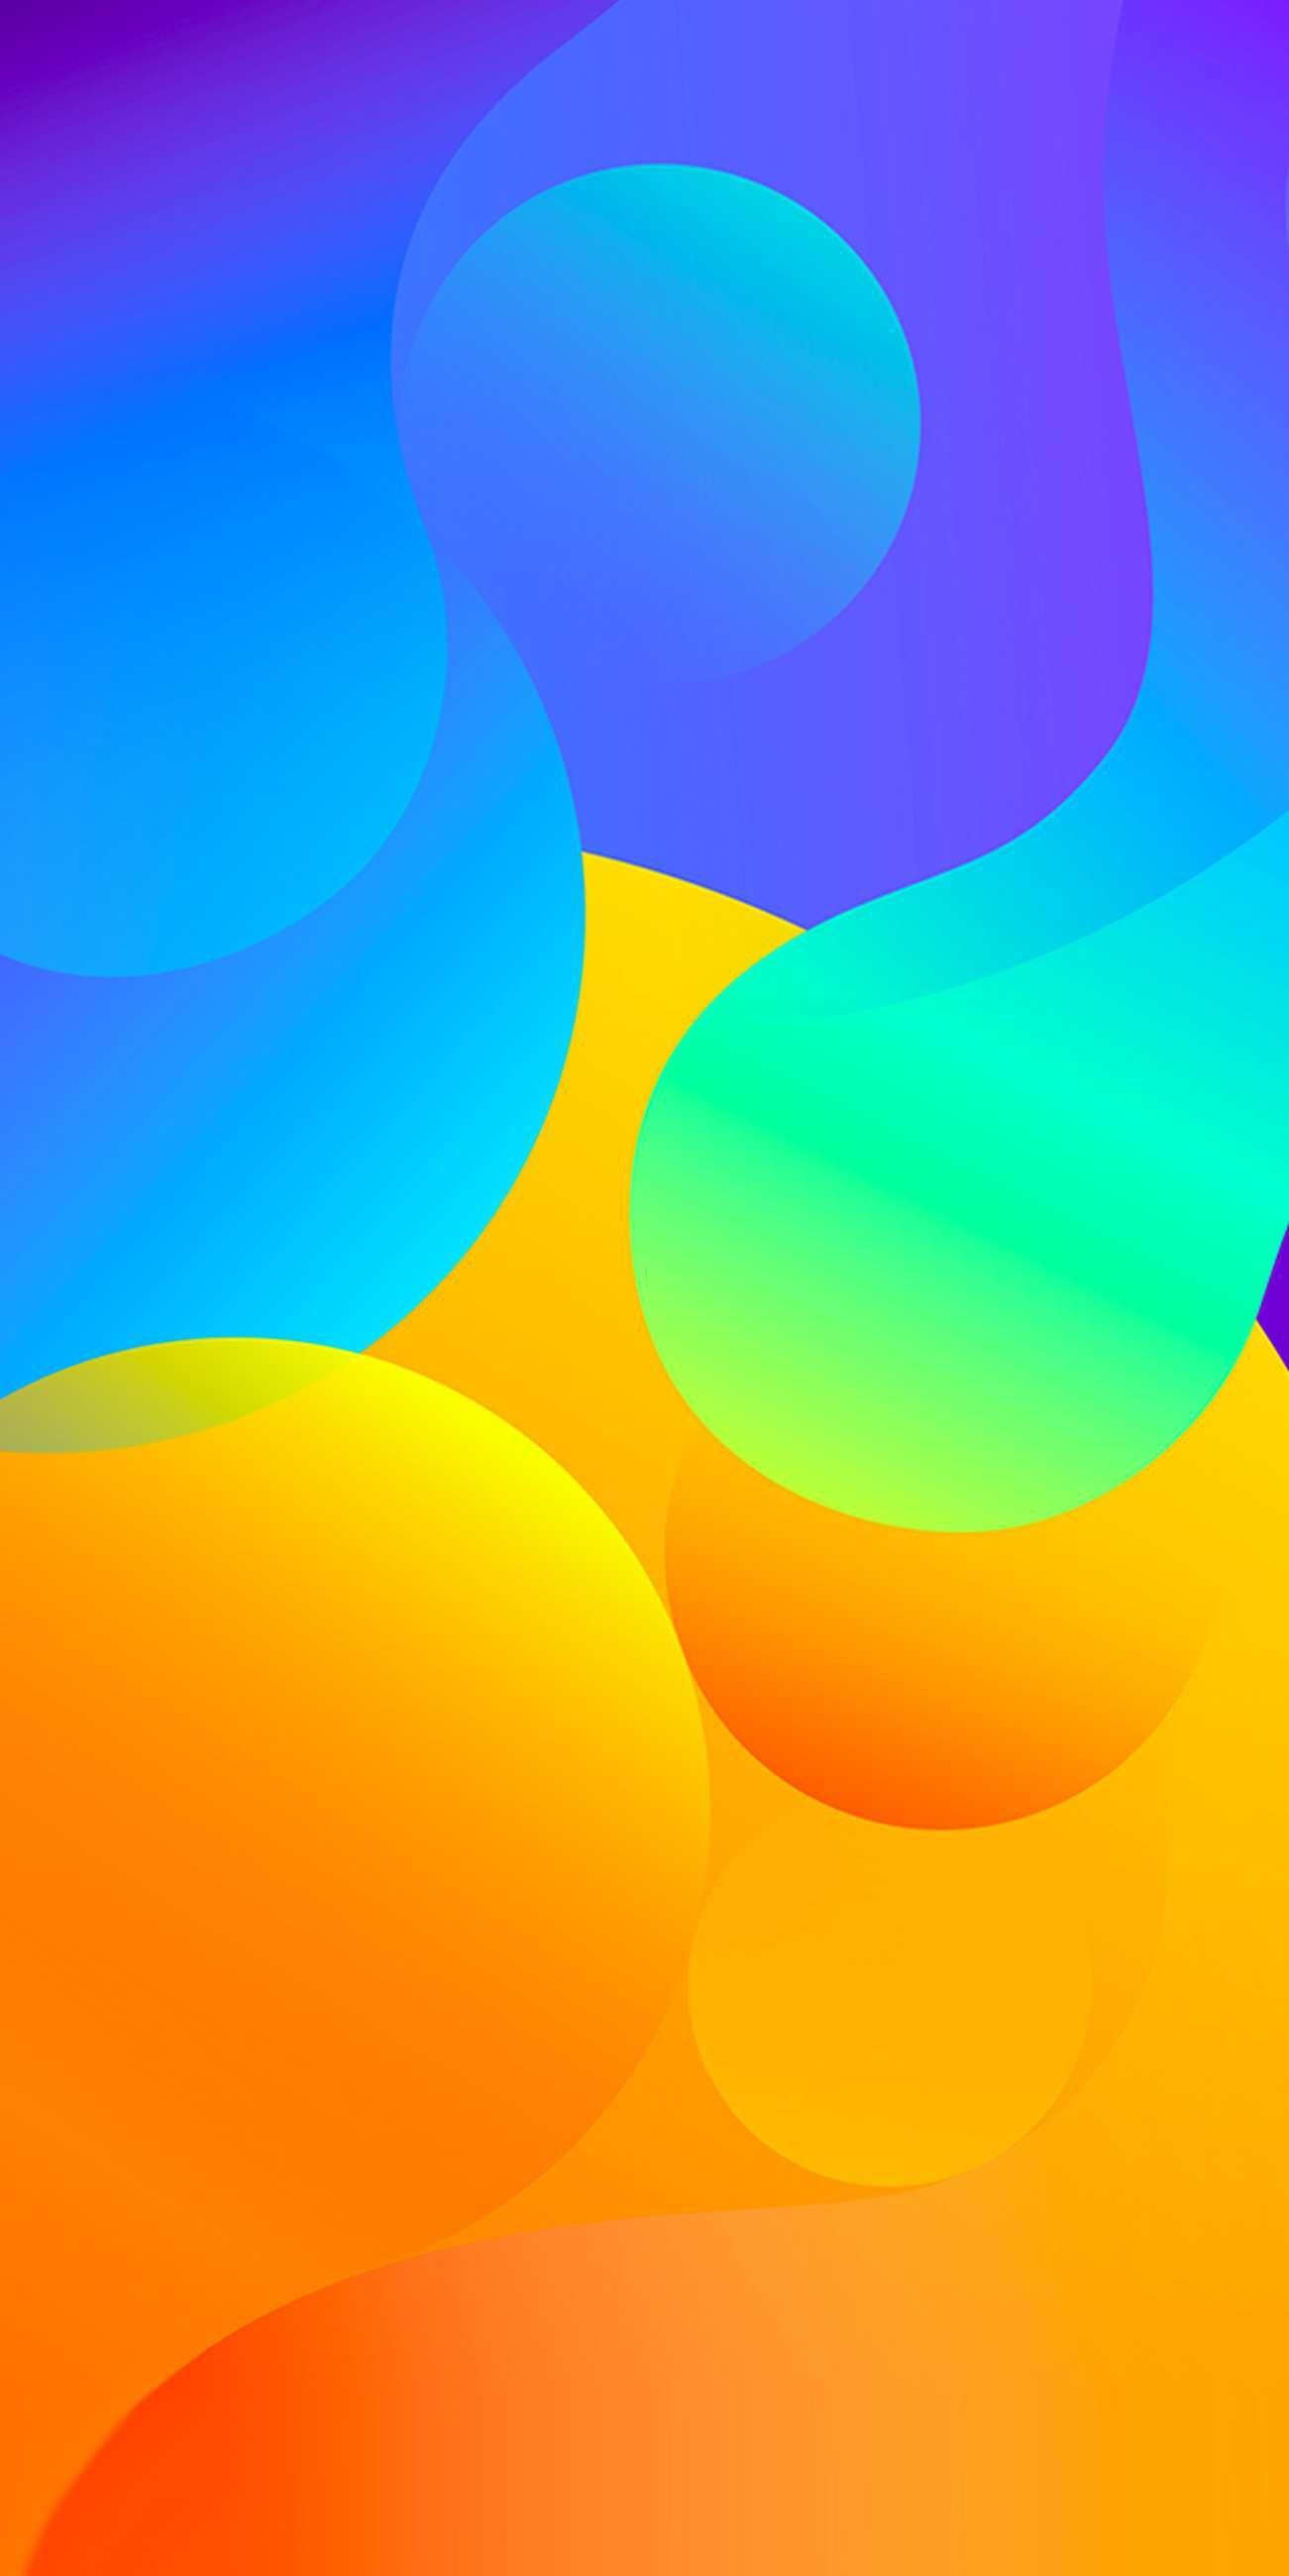 Colour Circles Abstract iPhone Wallpaper. iPhone Wallpaper in 2019